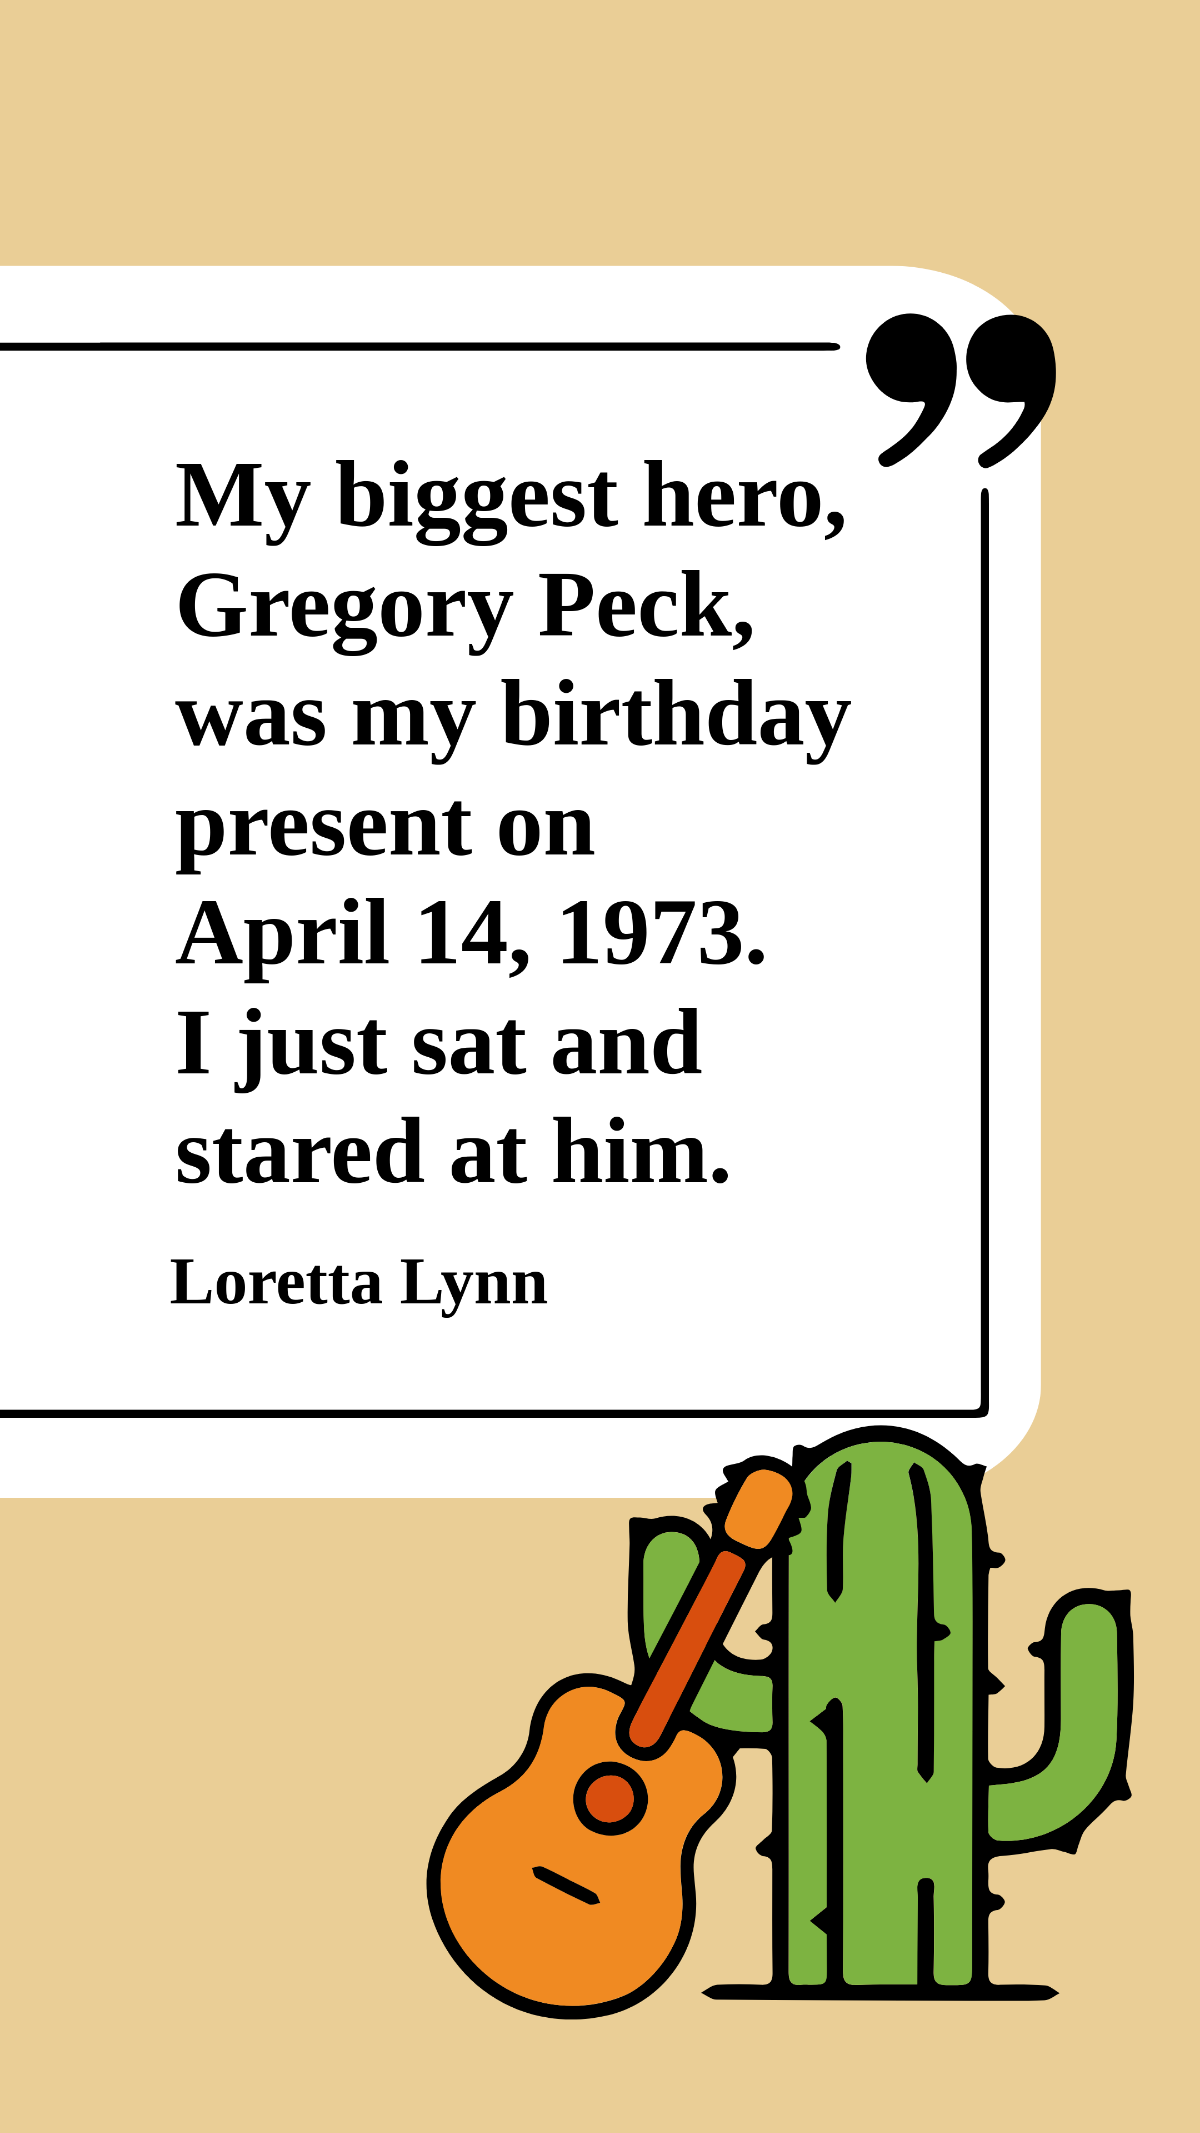 Loretta Lynn - My biggest hero, Gregory Peck, was my birthday present on April 14, 1973. I just sat and stared at him. Template